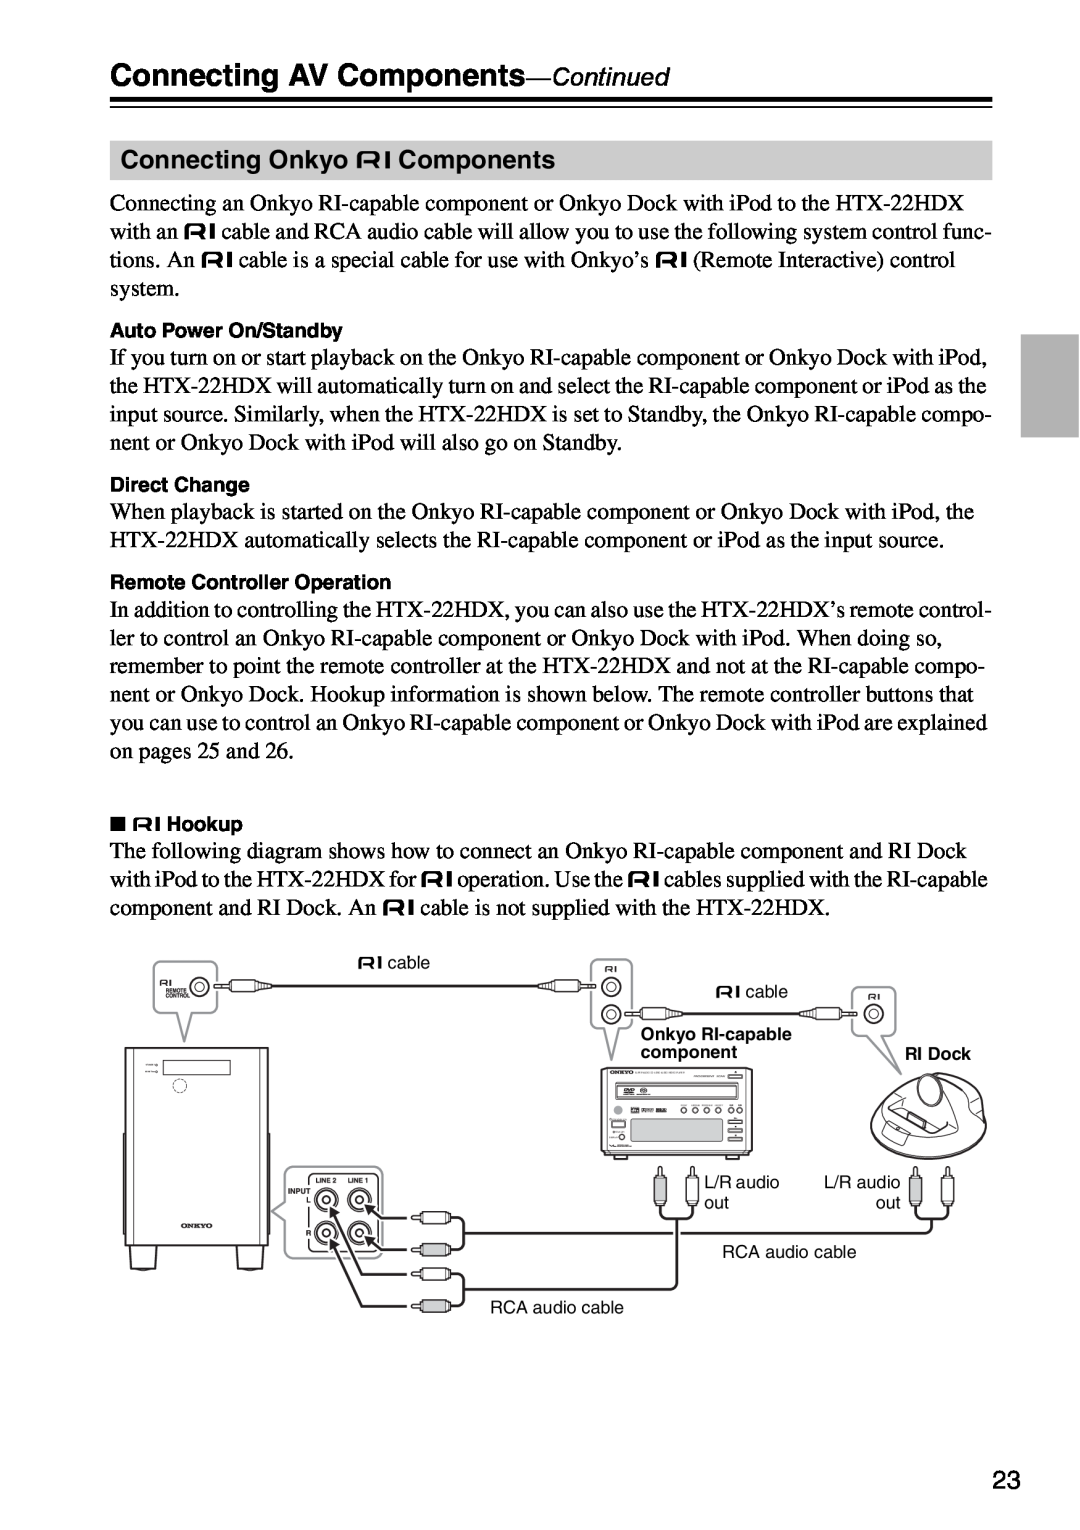 Onkyo HTX-22HDX Connecting Onkyo Components, Connecting AV Components-Continued, Auto Power On/Standby, Direct Change 